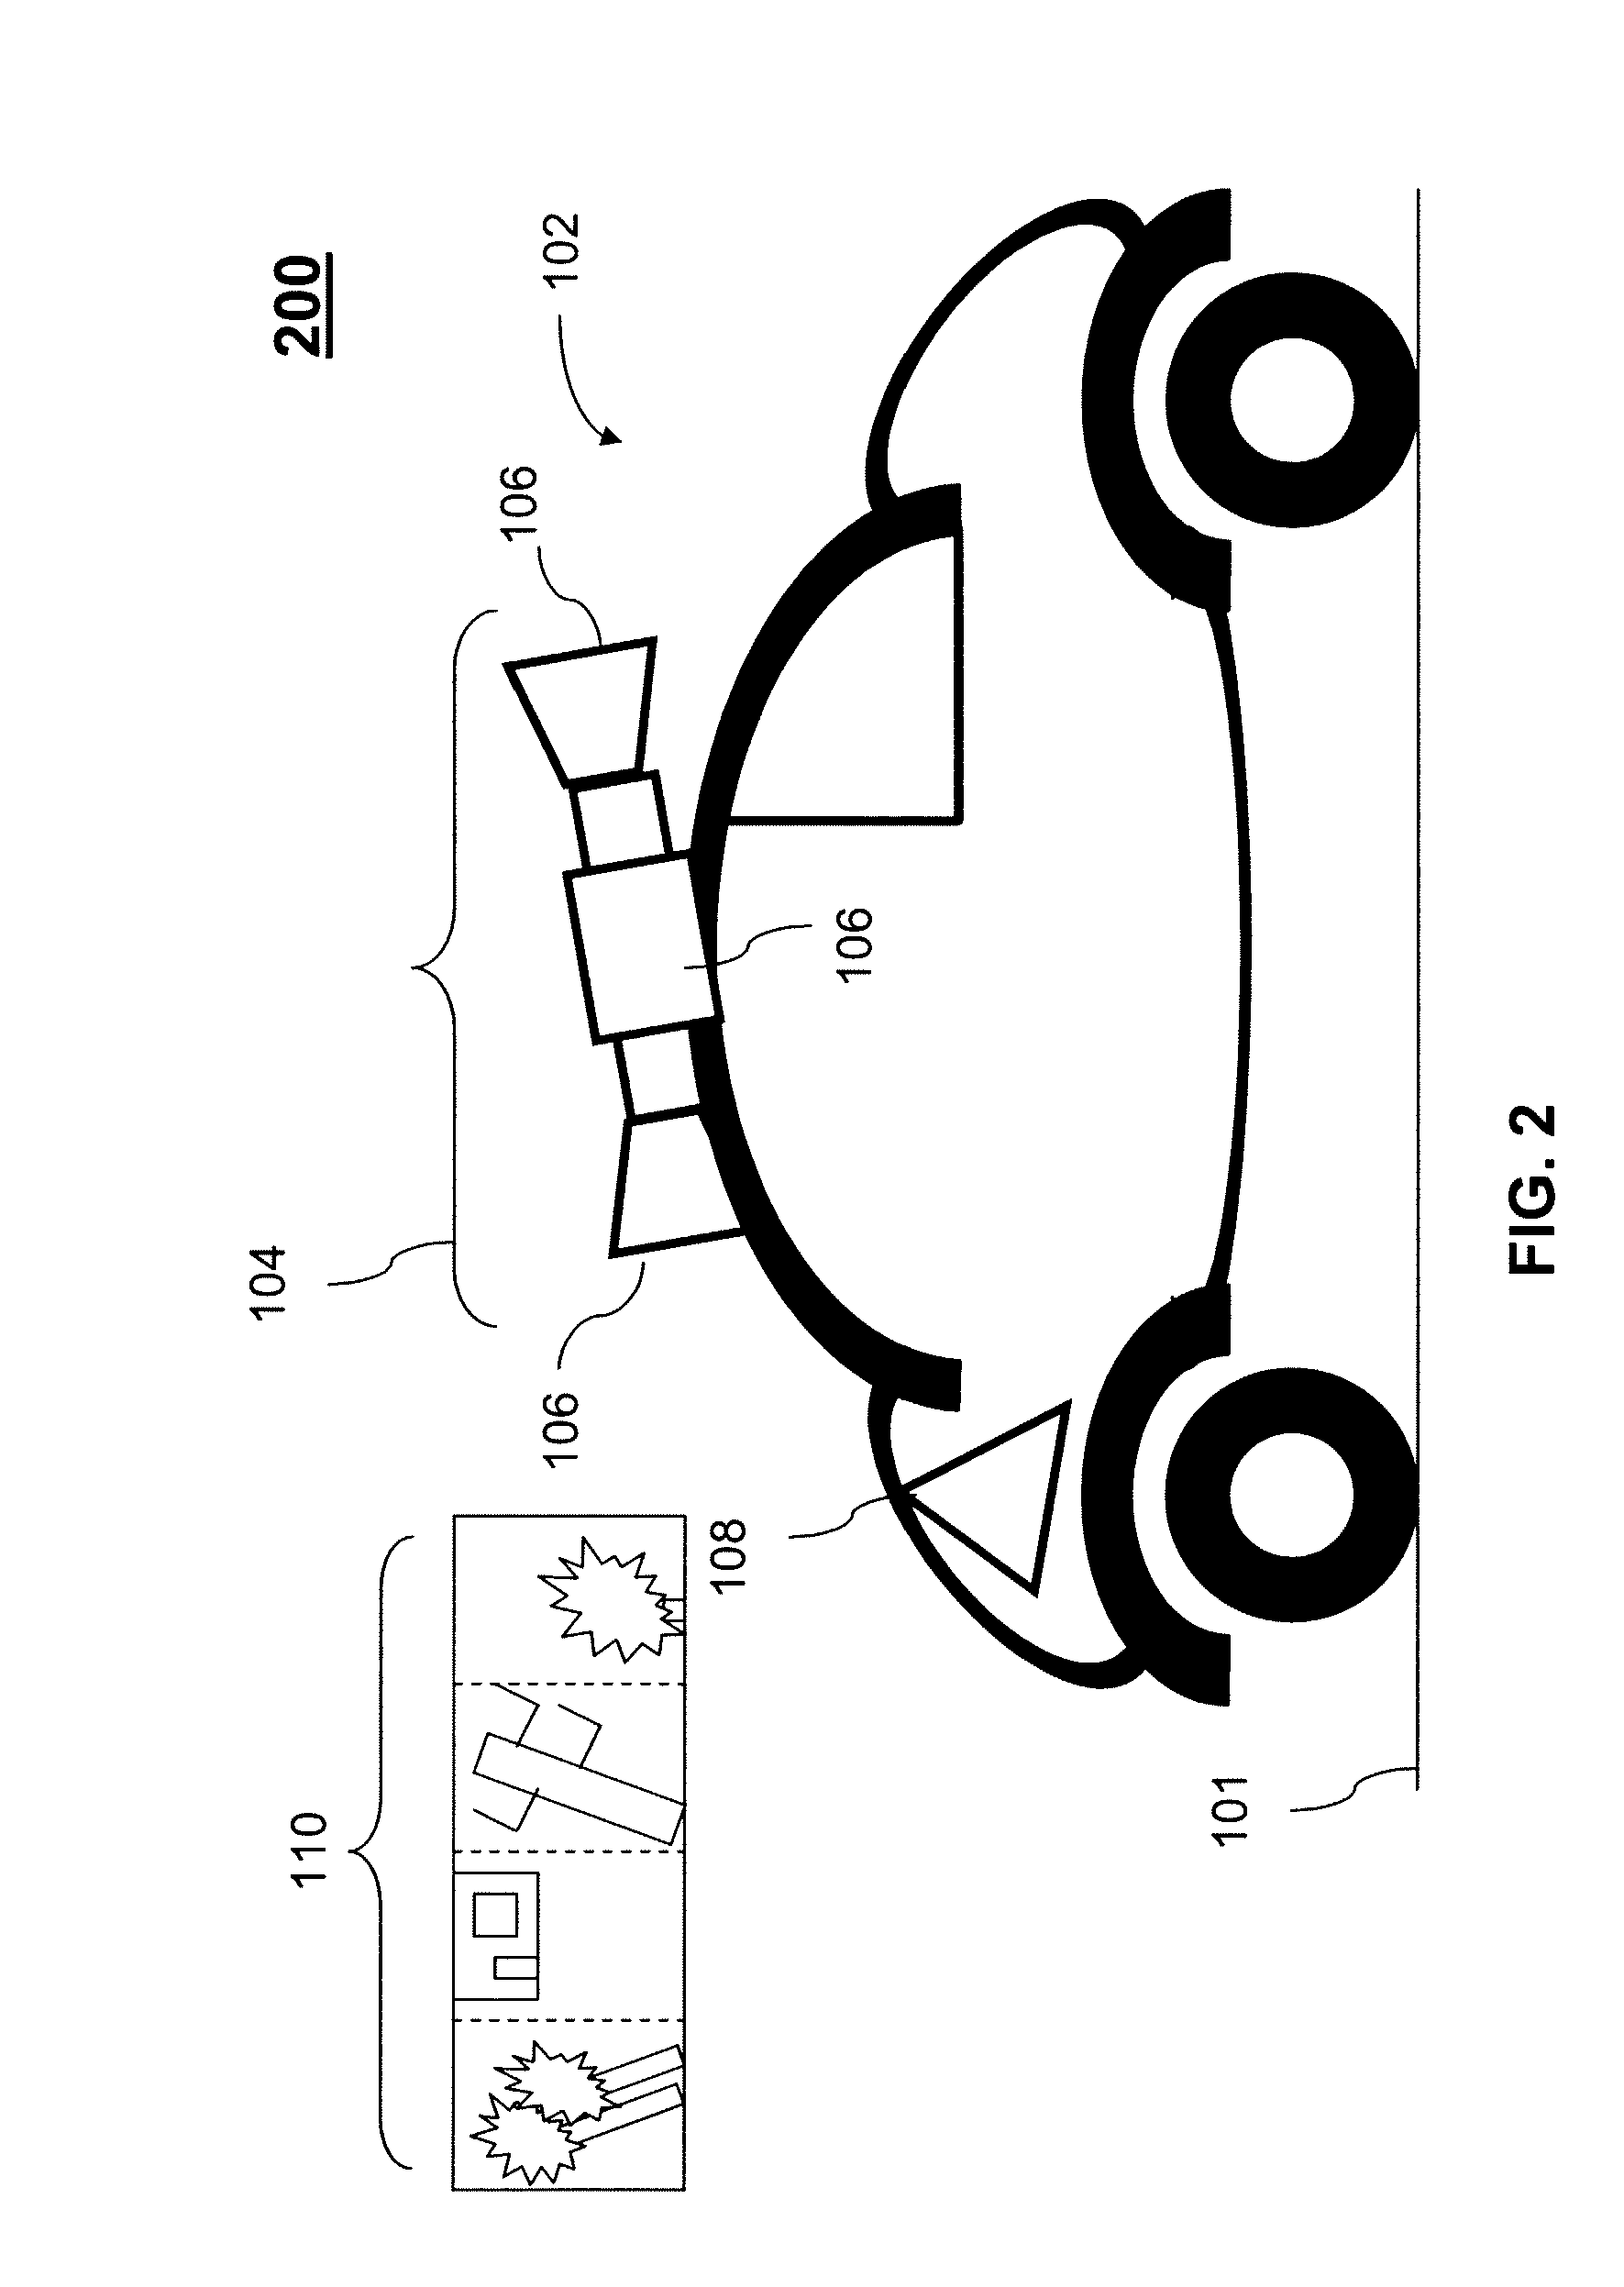 Estimation of panoramic camera orientation relative to a vehicle coordinate frame